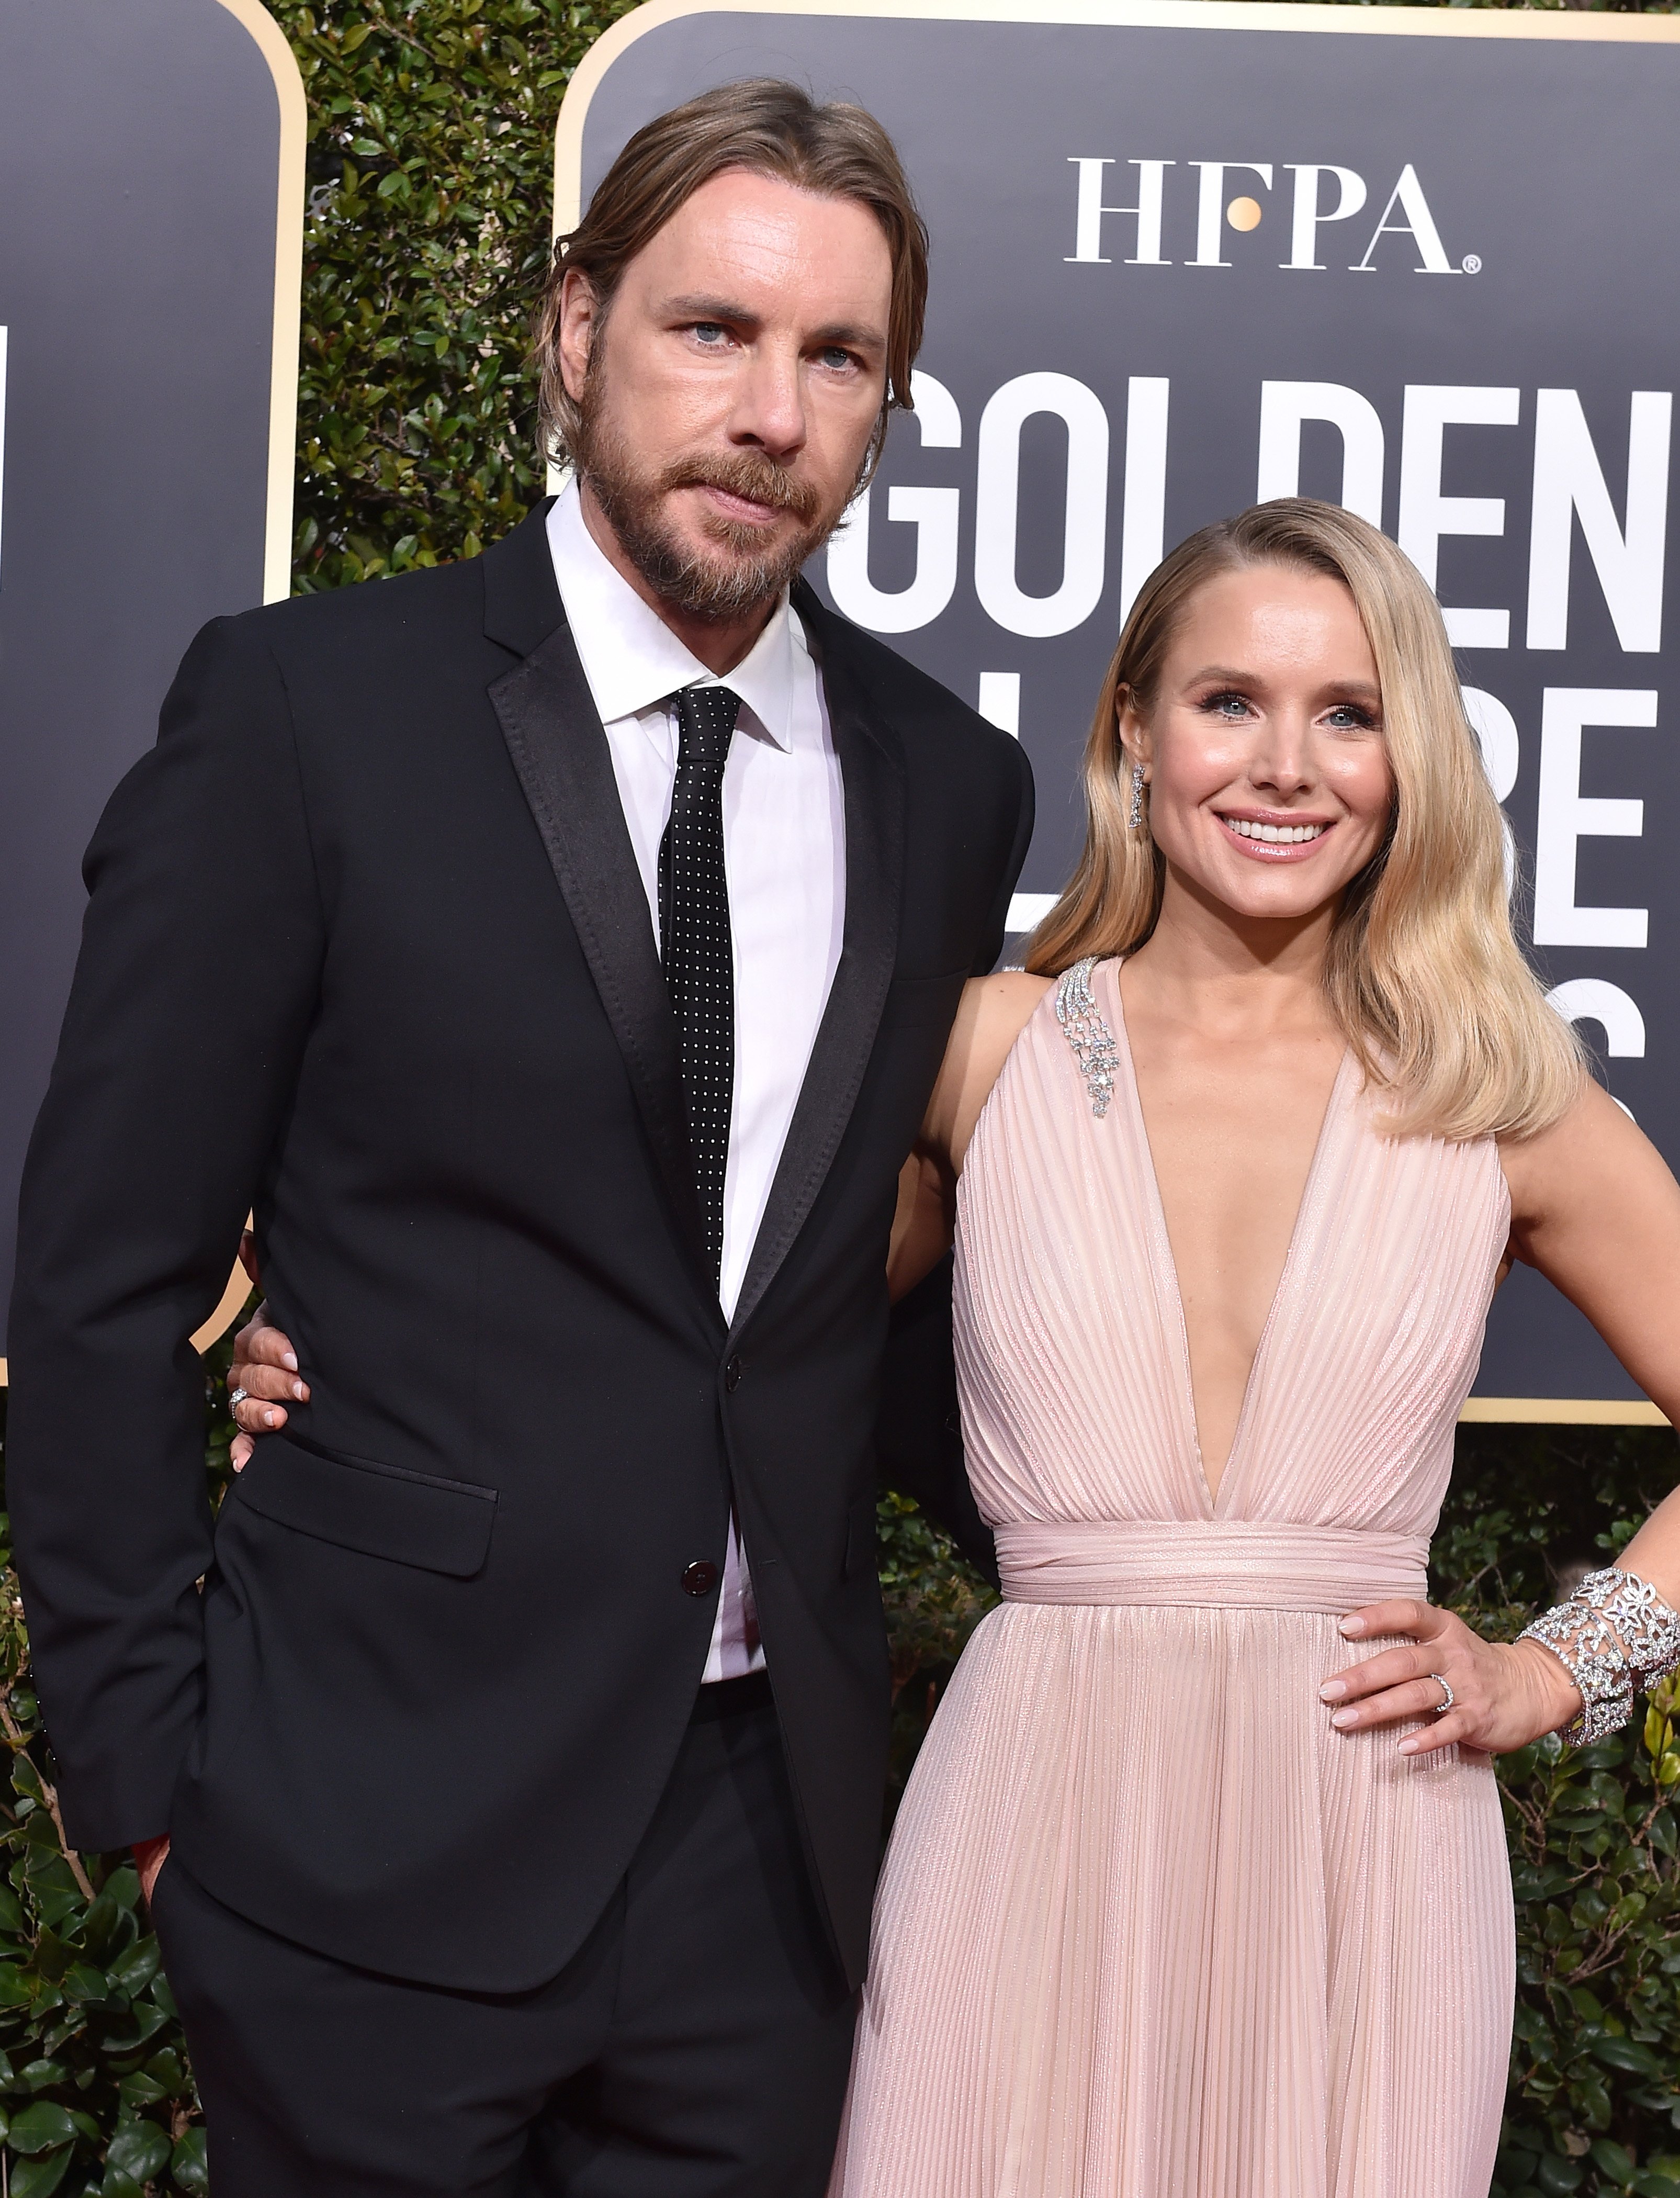 Dax Shepard and his wife, Kristen Bell at The Golden Globes in Beverly Hills, in January 2019. | Photo: Getty Images.